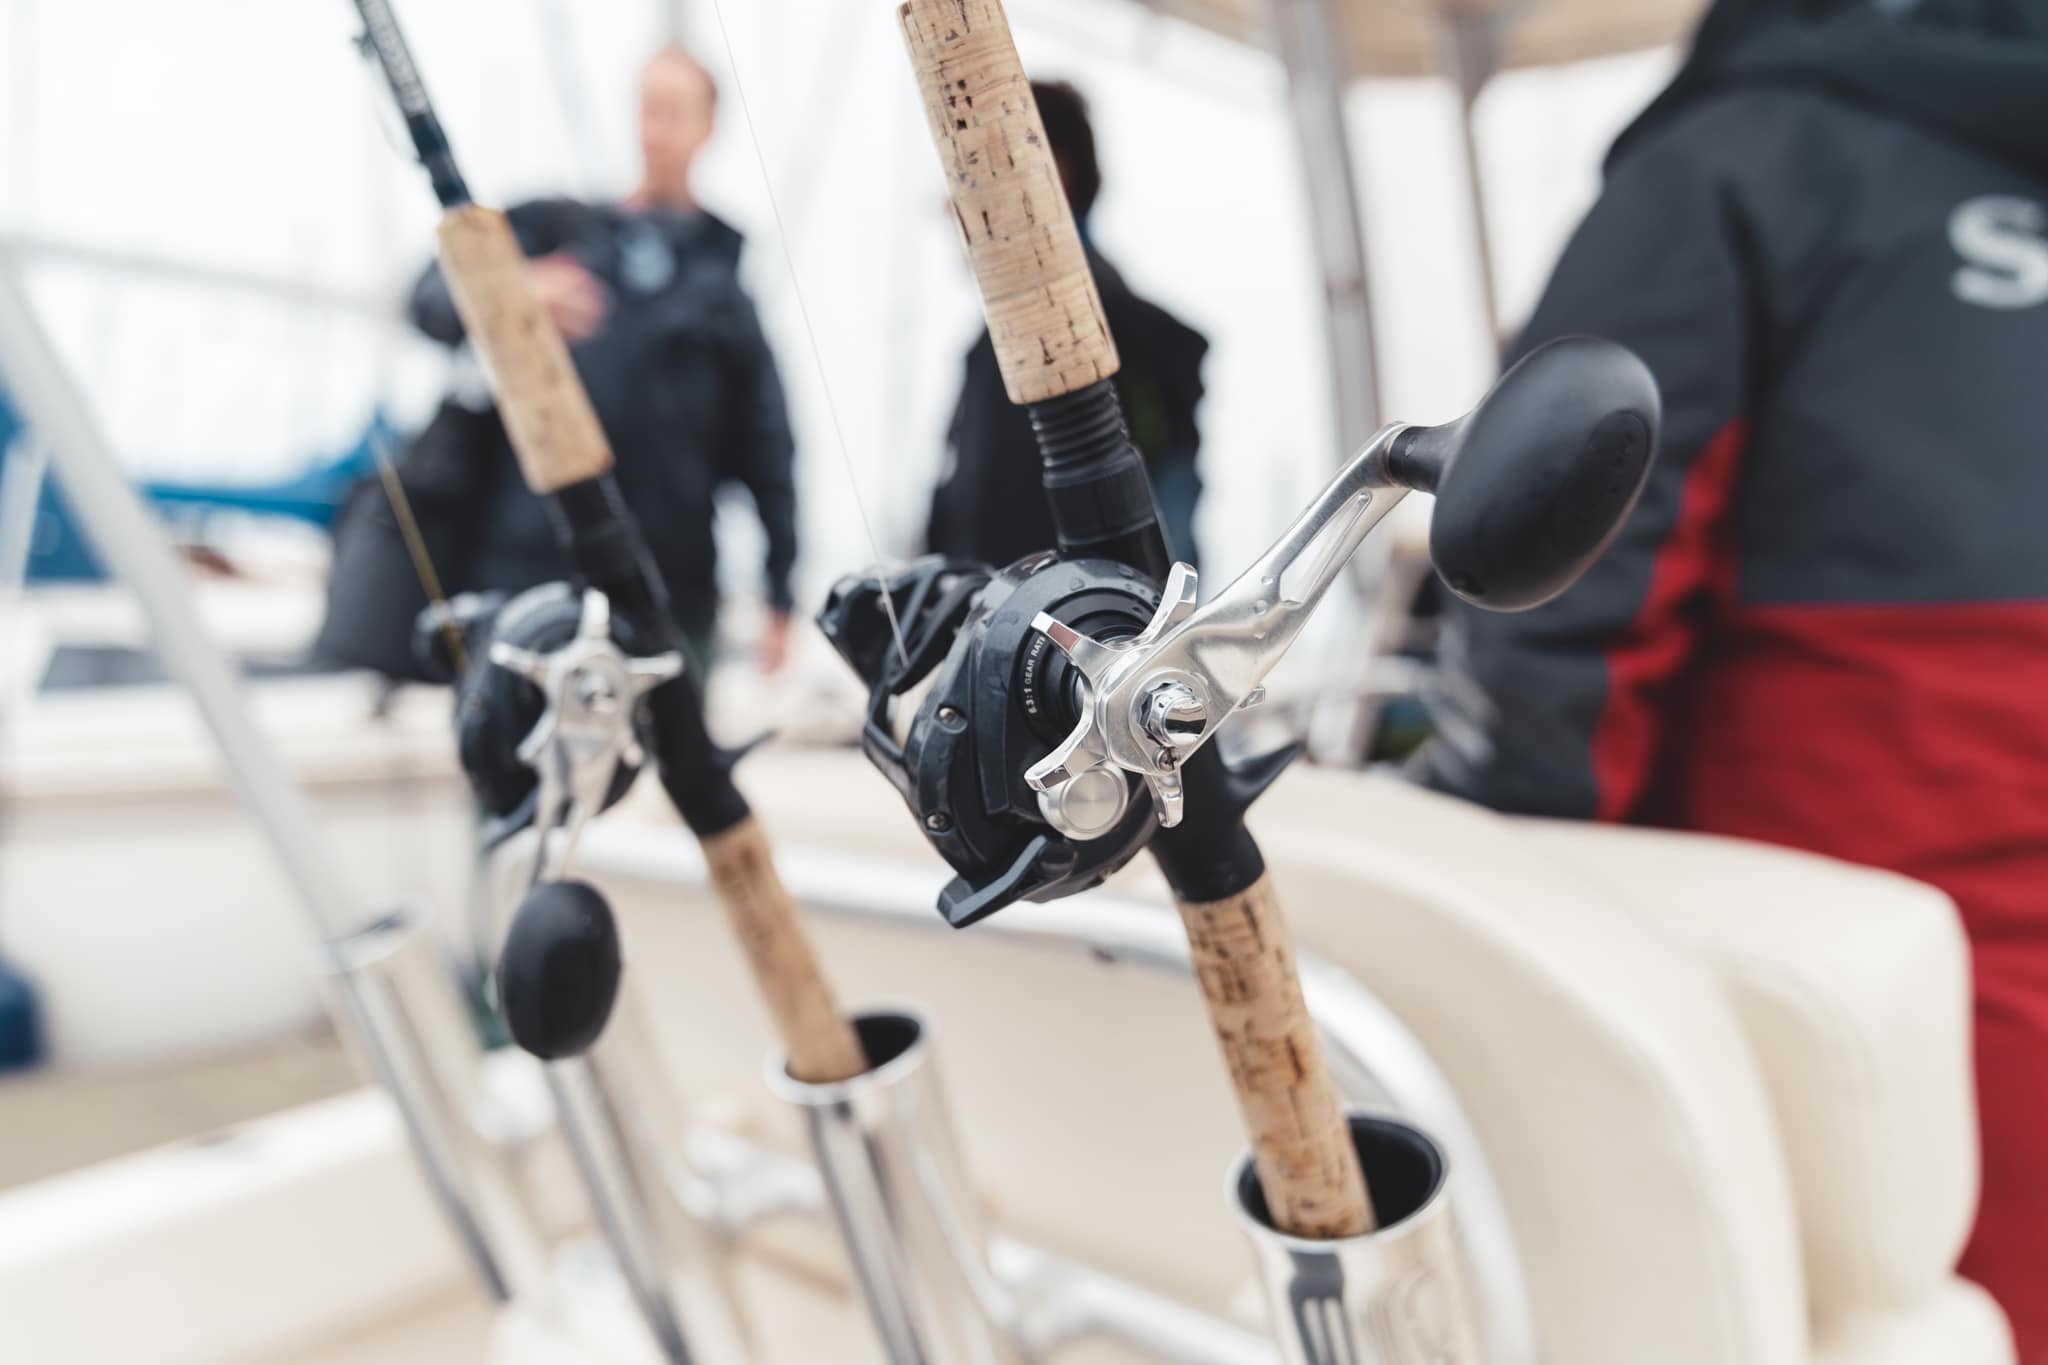 Charter fishing gear - rods and reels in holder